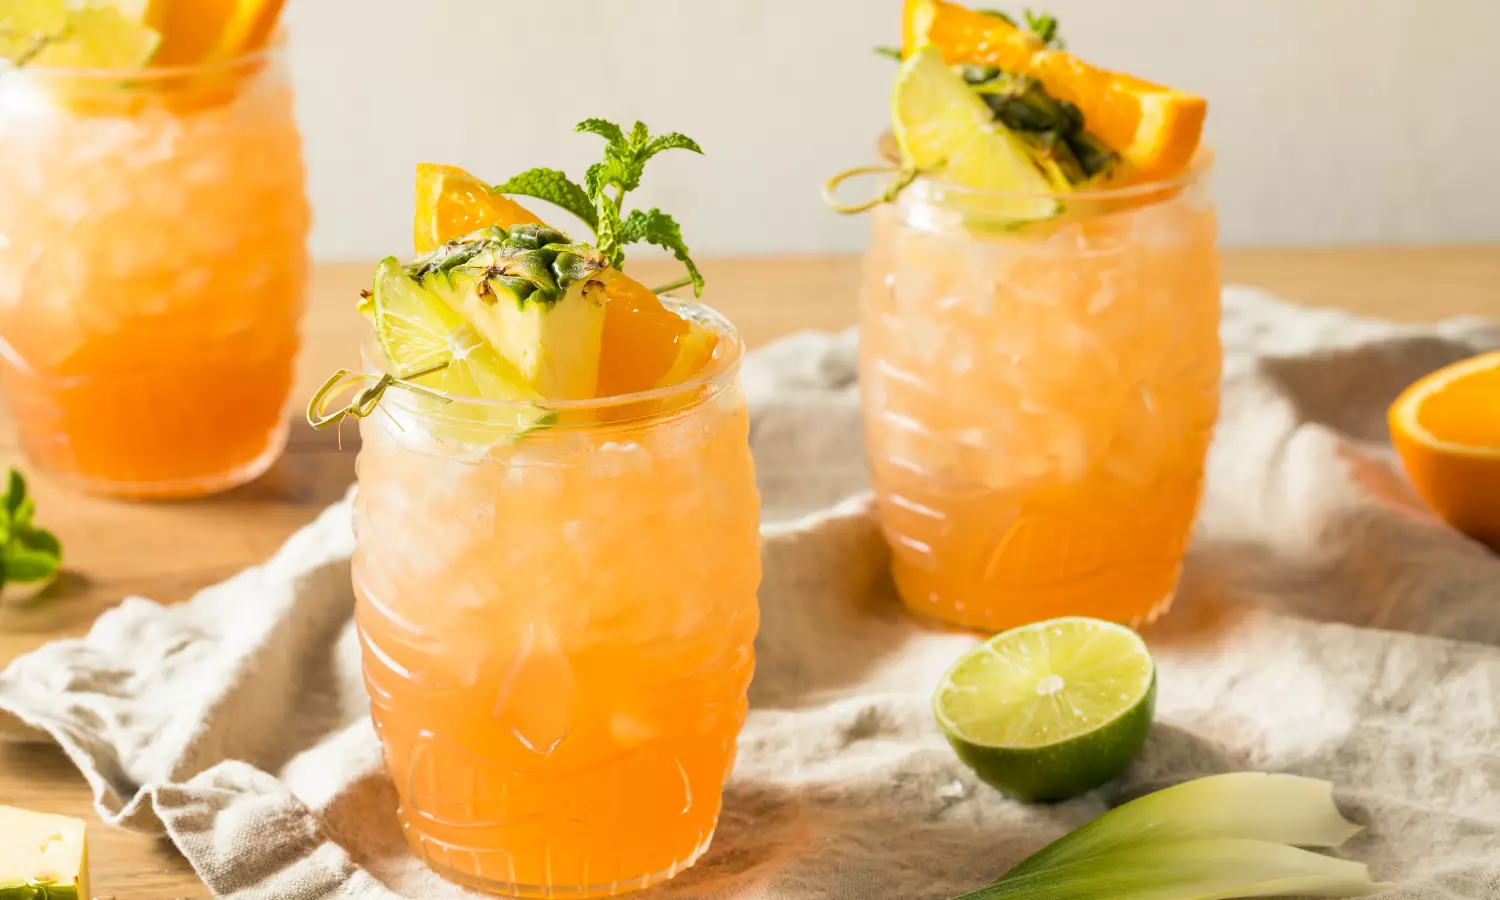 Take a look at 5 cocktails to shake, stir and sip under the sun